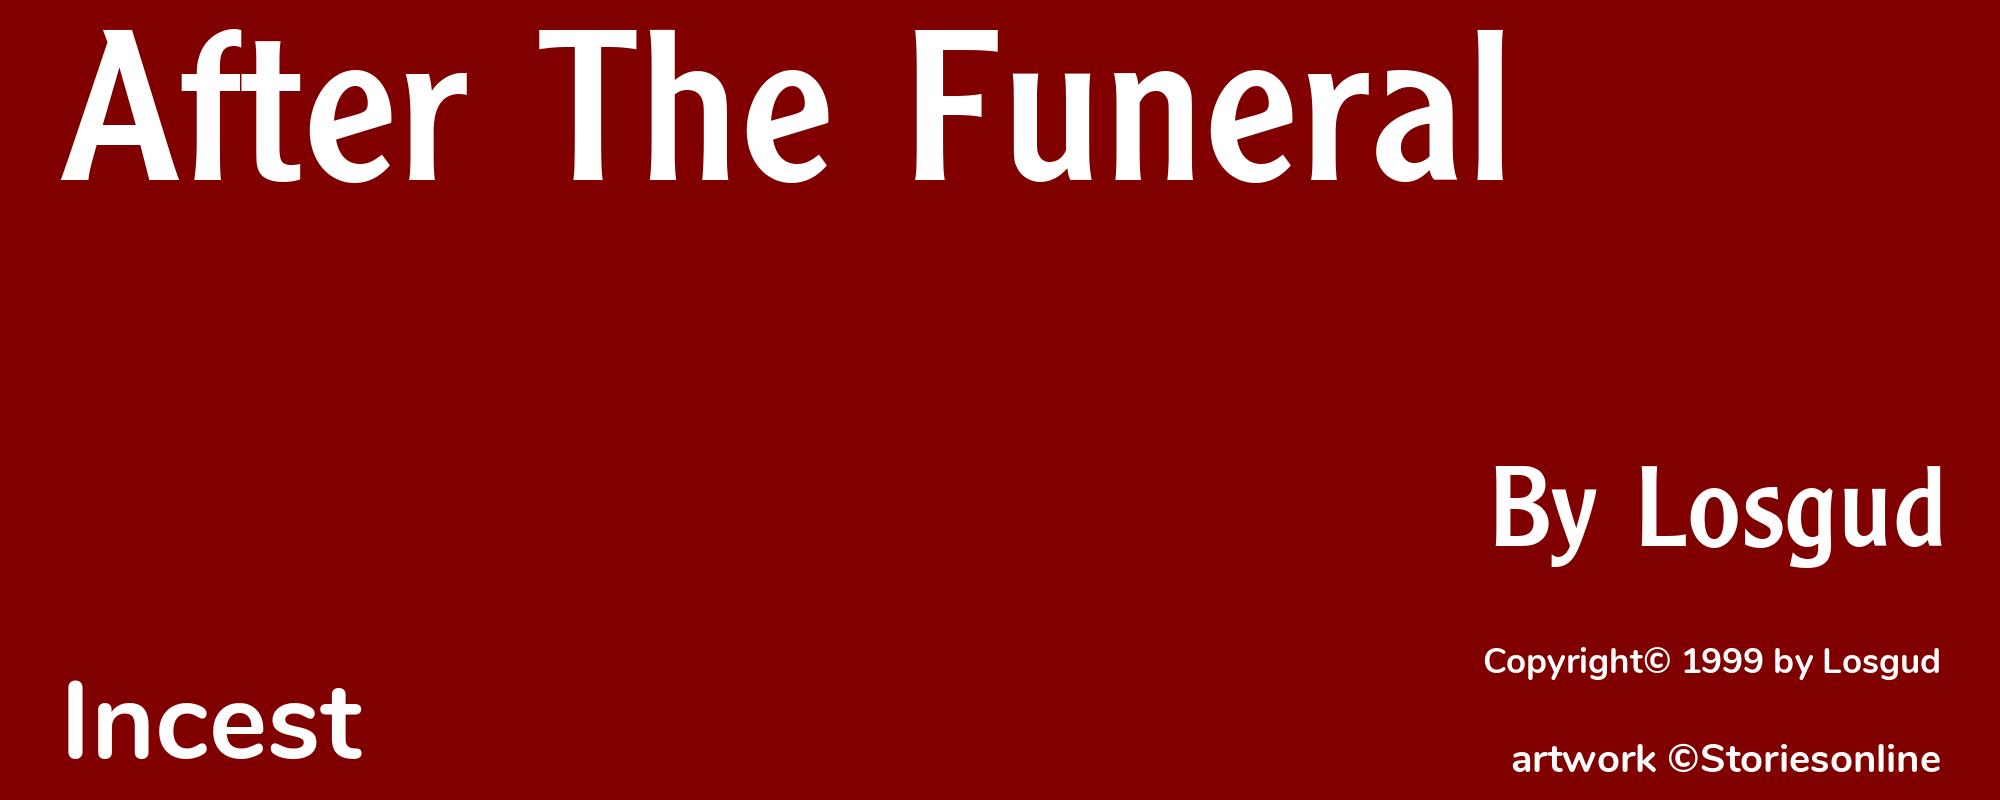 After The Funeral - Cover